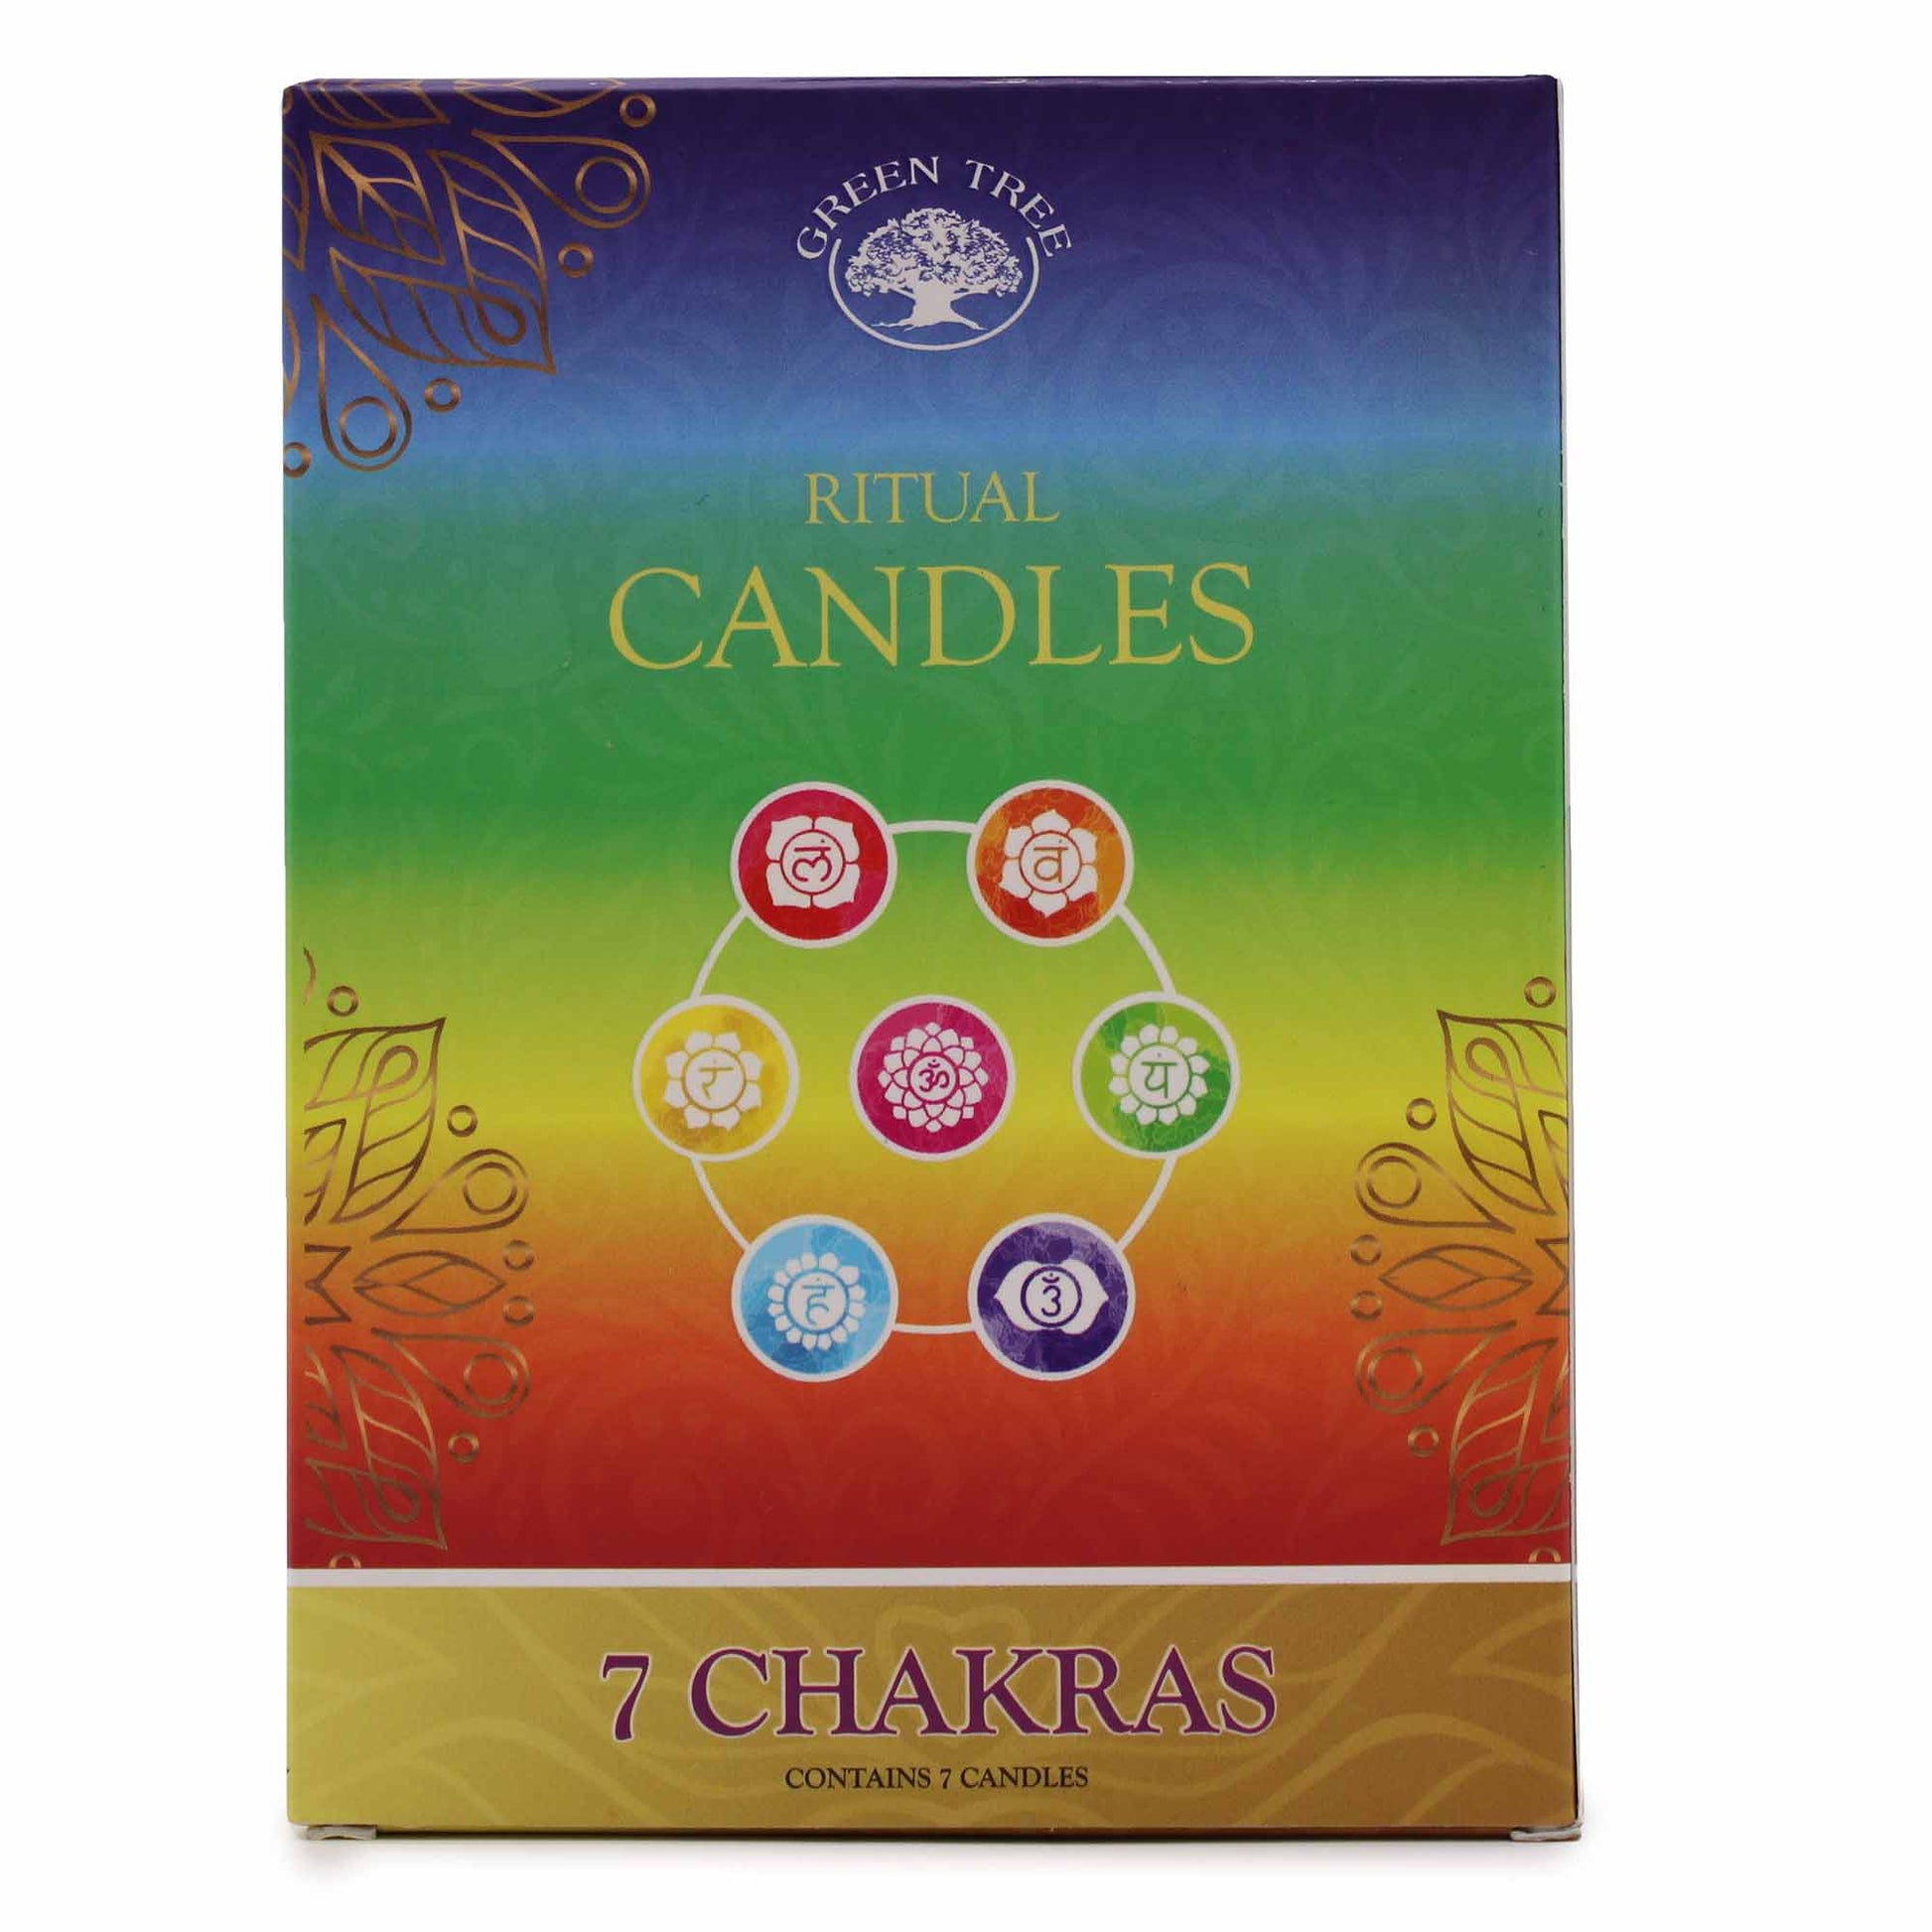 Set of 7 Spell Candles - 7 Chakras - best price from Maltashopper.com SCAND-08